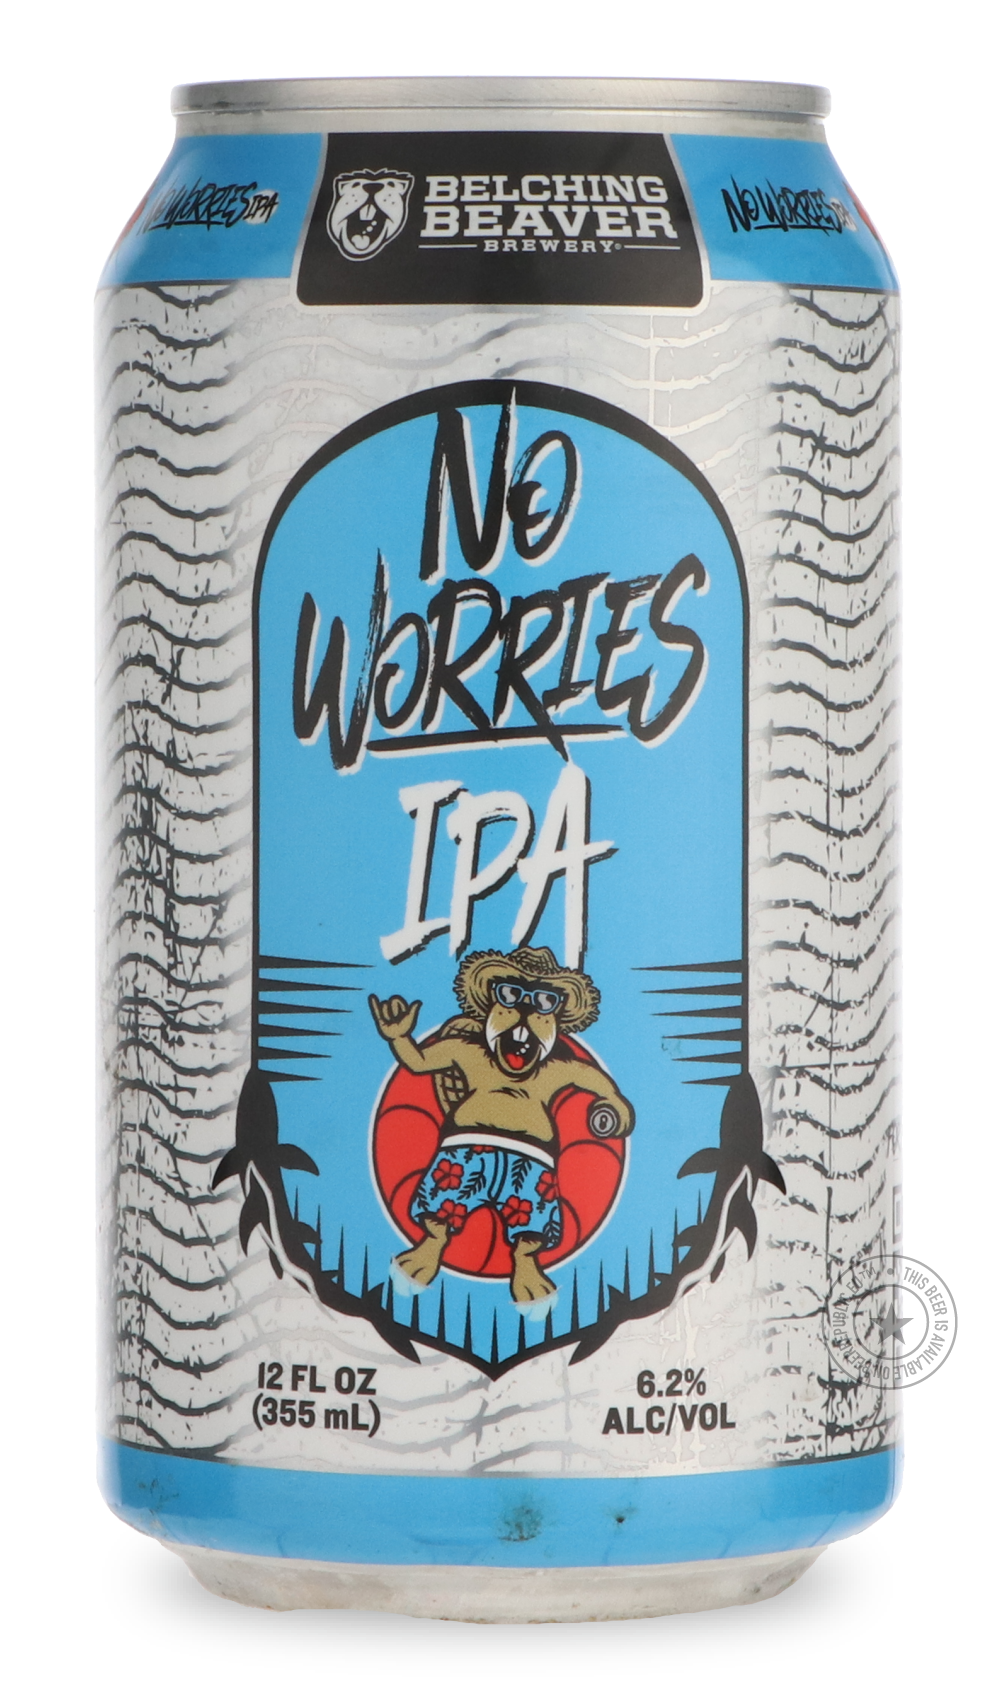 -Belching Beaver- No Worries-IPA- Only @ Beer Republic - The best online beer store for American & Canadian craft beer - Buy beer online from the USA and Canada - Bier online kopen - Amerikaans bier kopen - Craft beer store - Craft beer kopen - Amerikanisch bier kaufen - Bier online kaufen - Acheter biere online - IPA - Stout - Porter - New England IPA - Hazy IPA - Imperial Stout - Barrel Aged - Barrel Aged Imperial Stout - Brown - Dark beer - Blond - Blonde - Pilsner - Lager - Wheat - Weizen - Amber - Barl